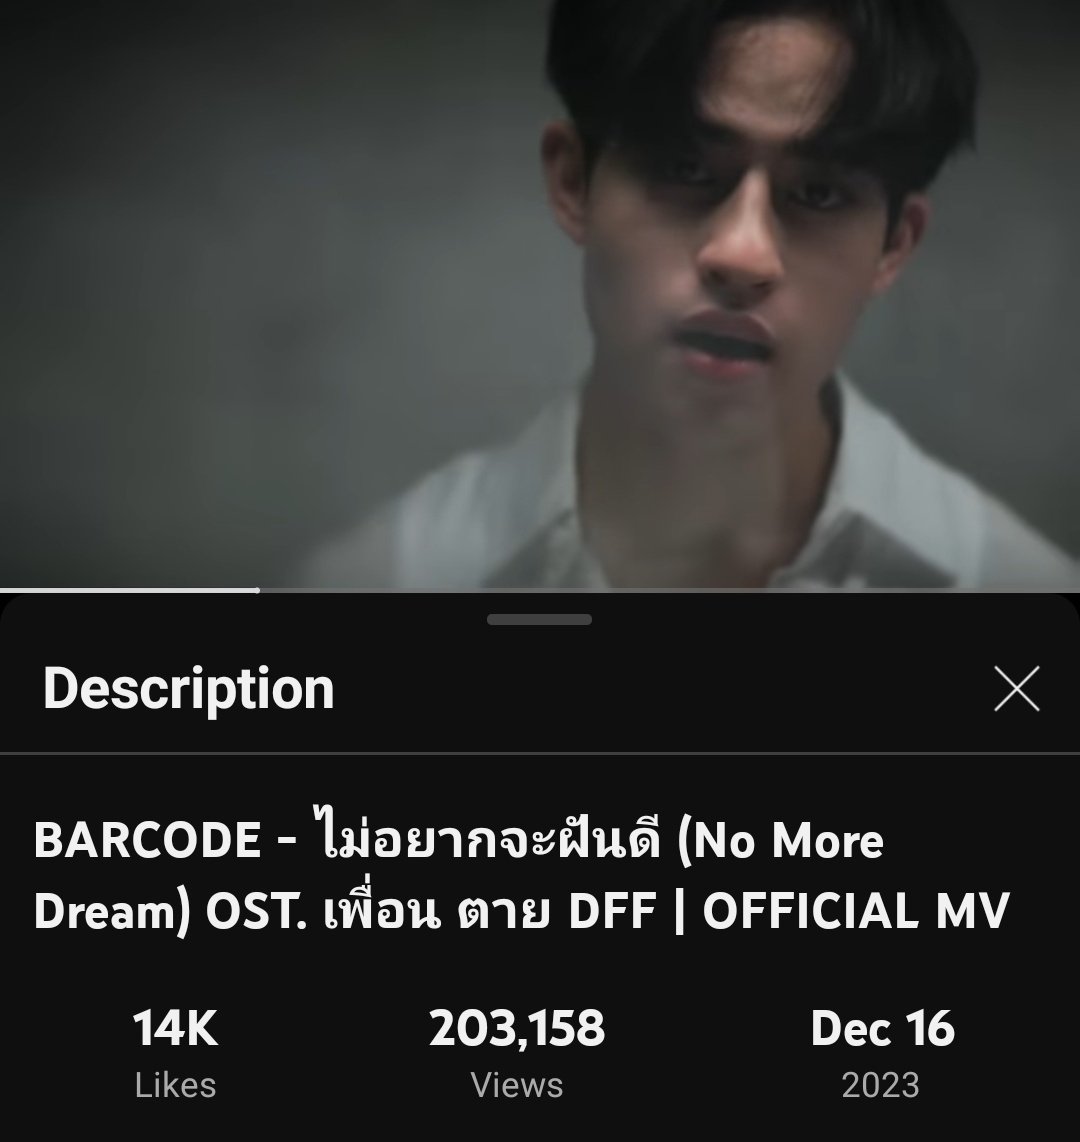 No More Dream will always remind me of Non. A beautiful soul who deserve all the love in the world. In another life, I hope he'll find the love and happiness that he deserve🤍

🎵NMD Streaming Party🎵

#StreamBarcodeNMD
#barcodetin #Unit
@BarcodeTin